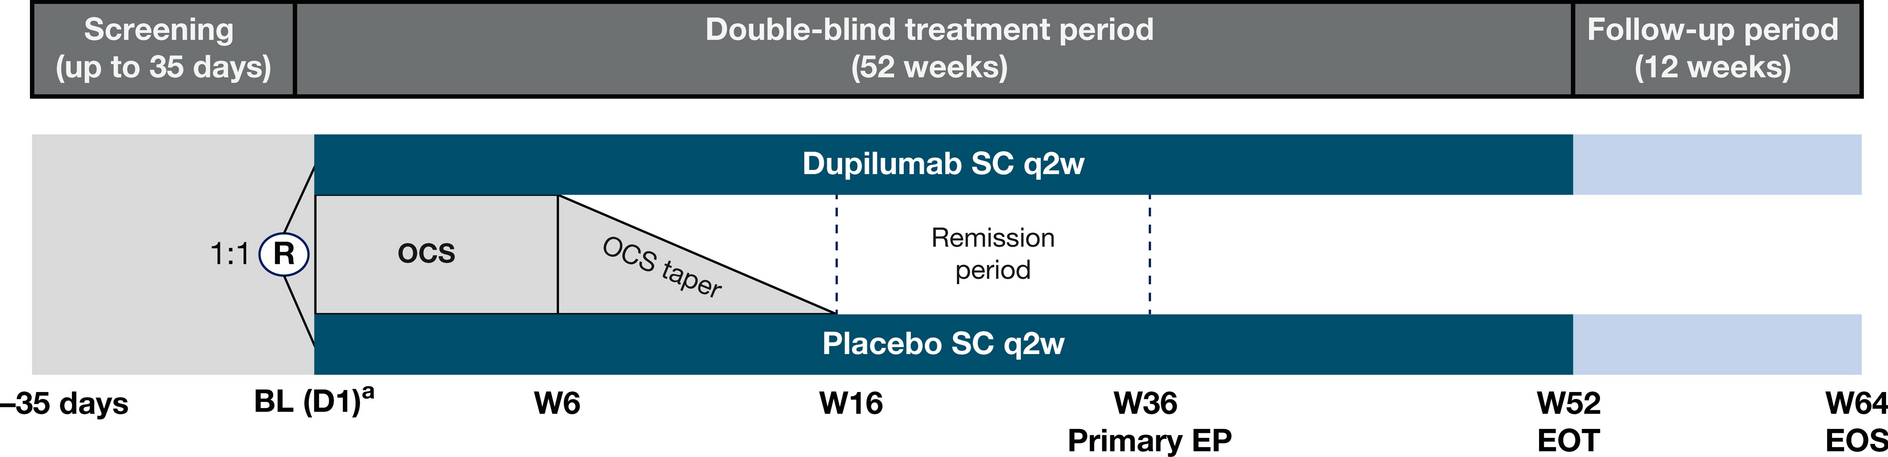 Study Design of a Phase 2/3 Randomized Controlled Trial of Dupilumab in Adults with Bullous Pemphigoid: LIBERTY-BP ADEPT